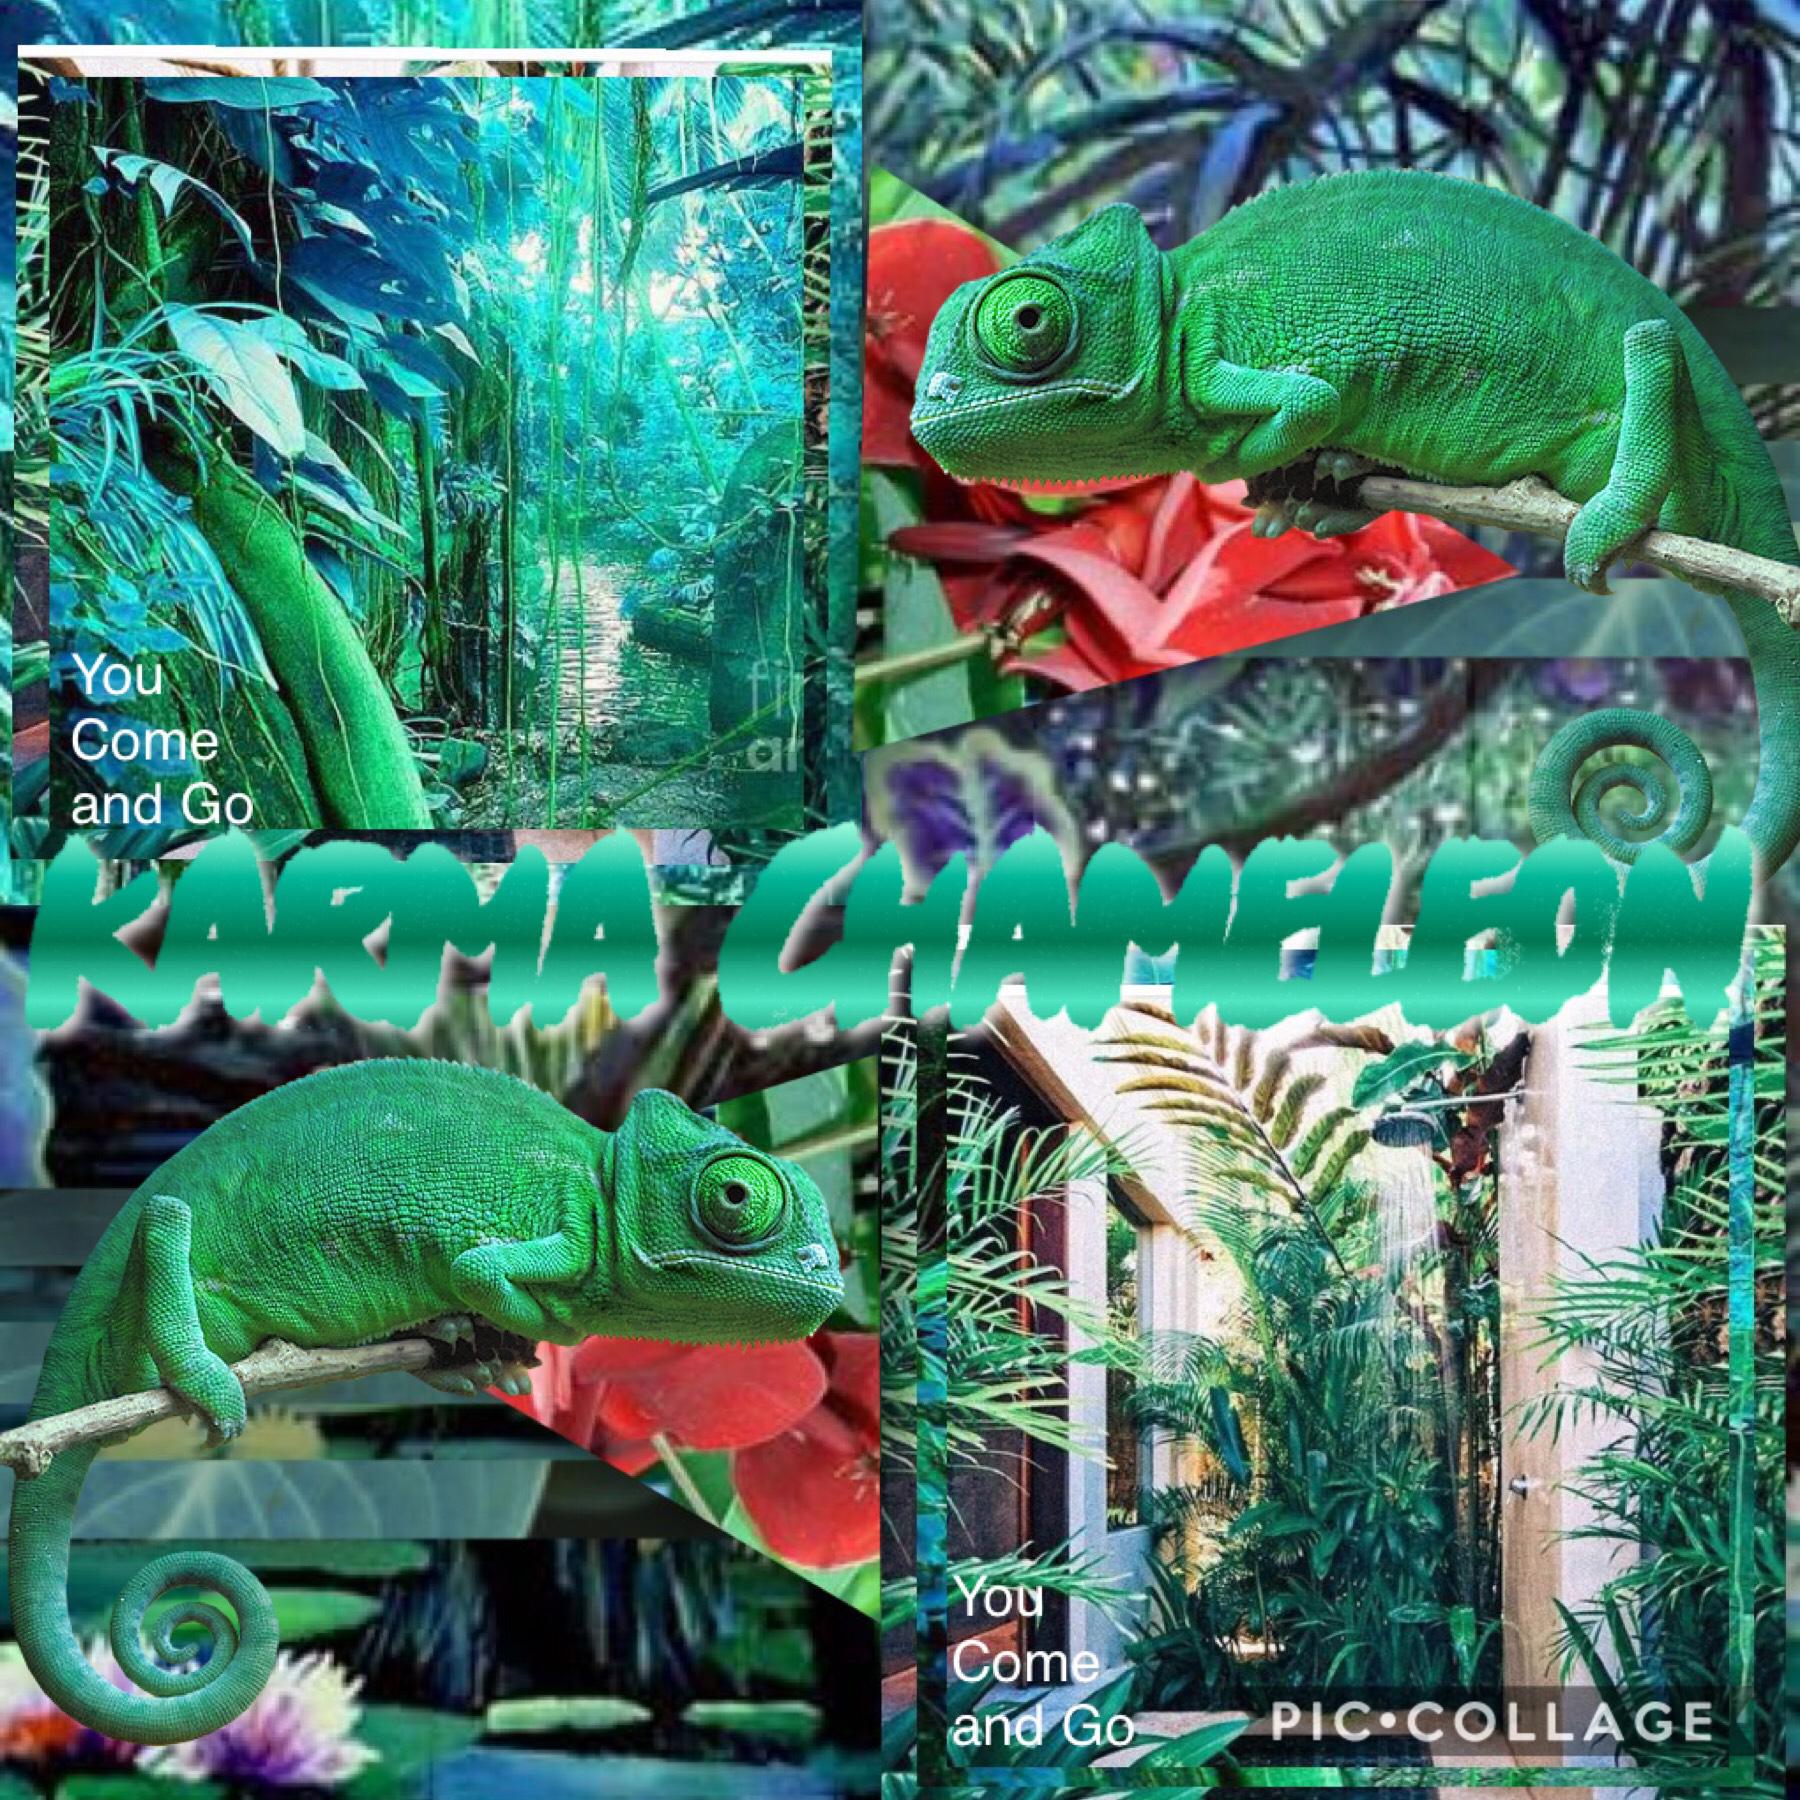 Karma Chameleon collage! 🦎

Btw, I will be posting some VERY overdue stuff soon(cause I’m bad at running this account!)!